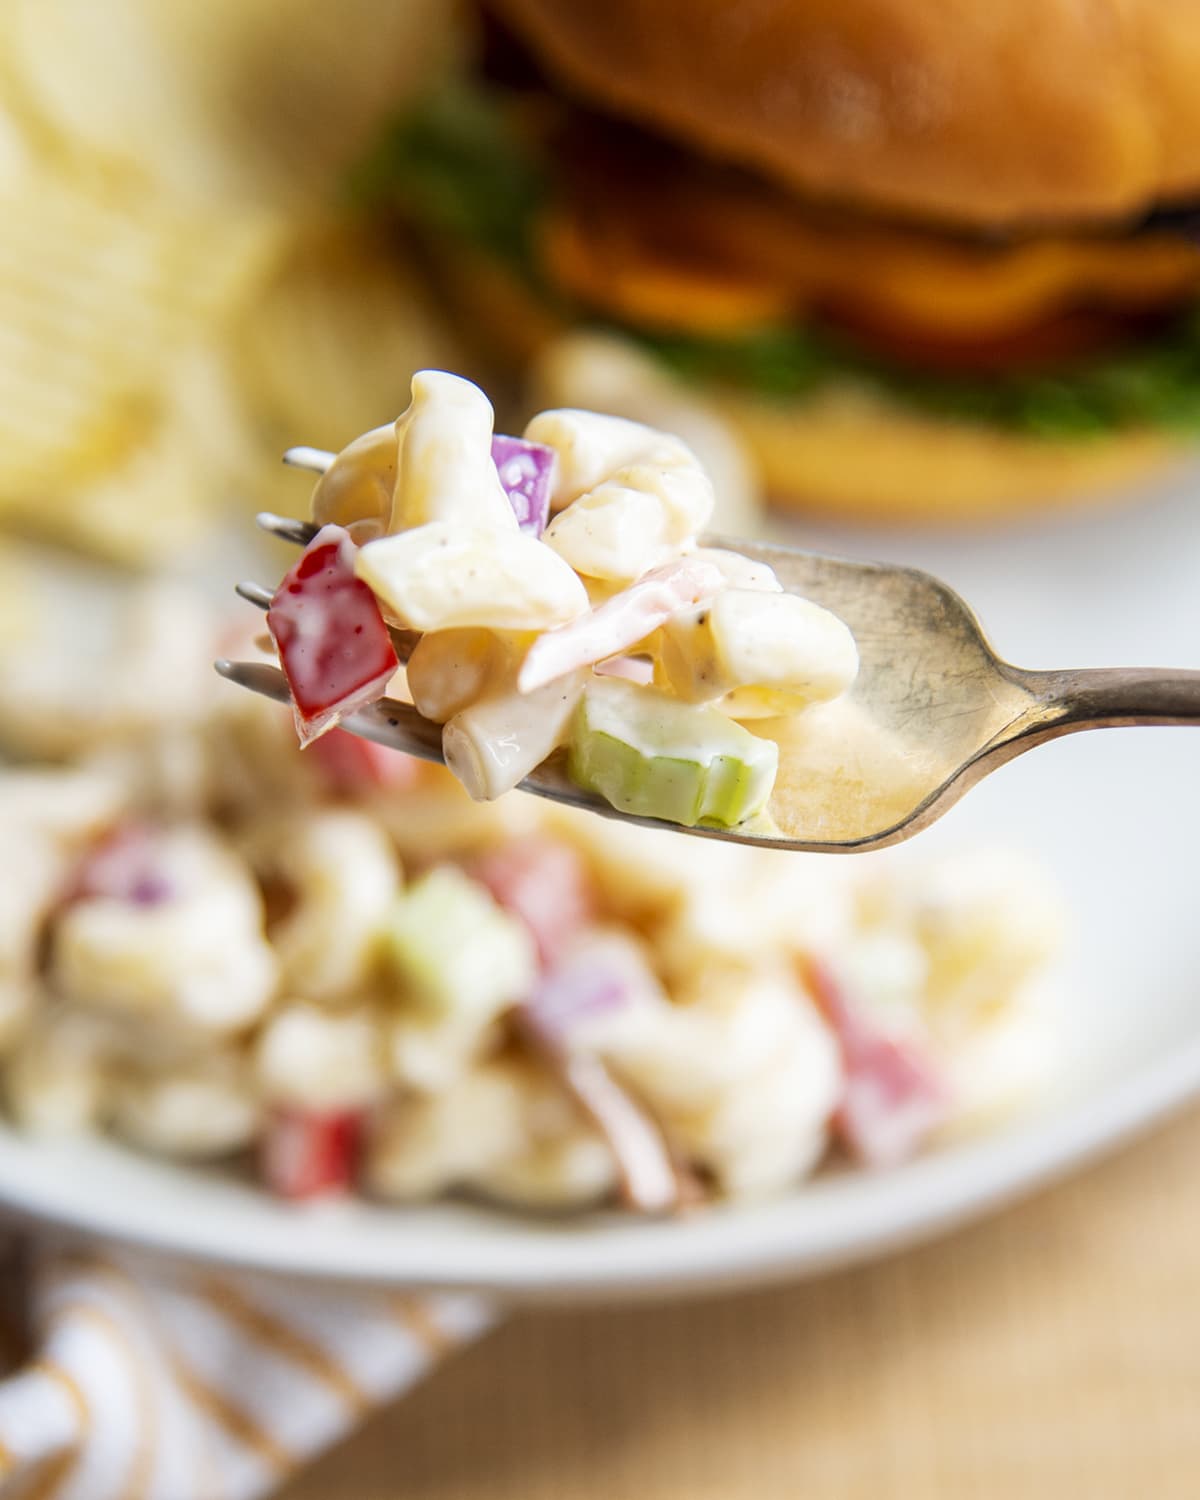 A forkful of macaroni salad with elbow noodles, celery, and red bell pepper.